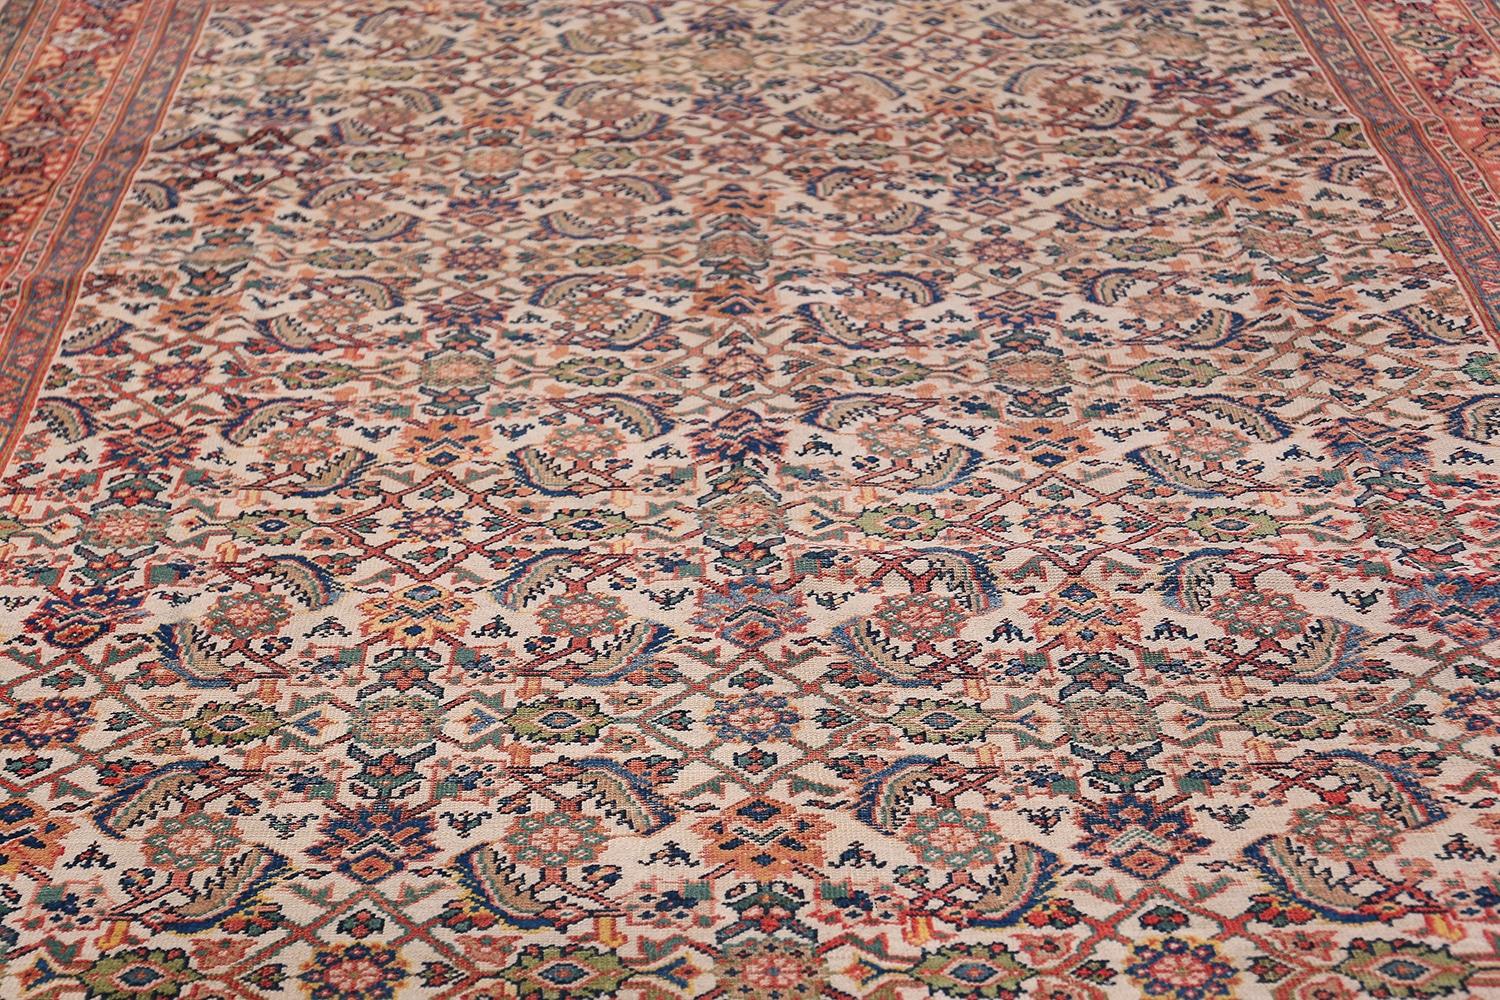 Antique Persian Sultanabad Carpet. Size: 8 ft x 10 ft 7 in (2.44 m x 3.23 m) 4